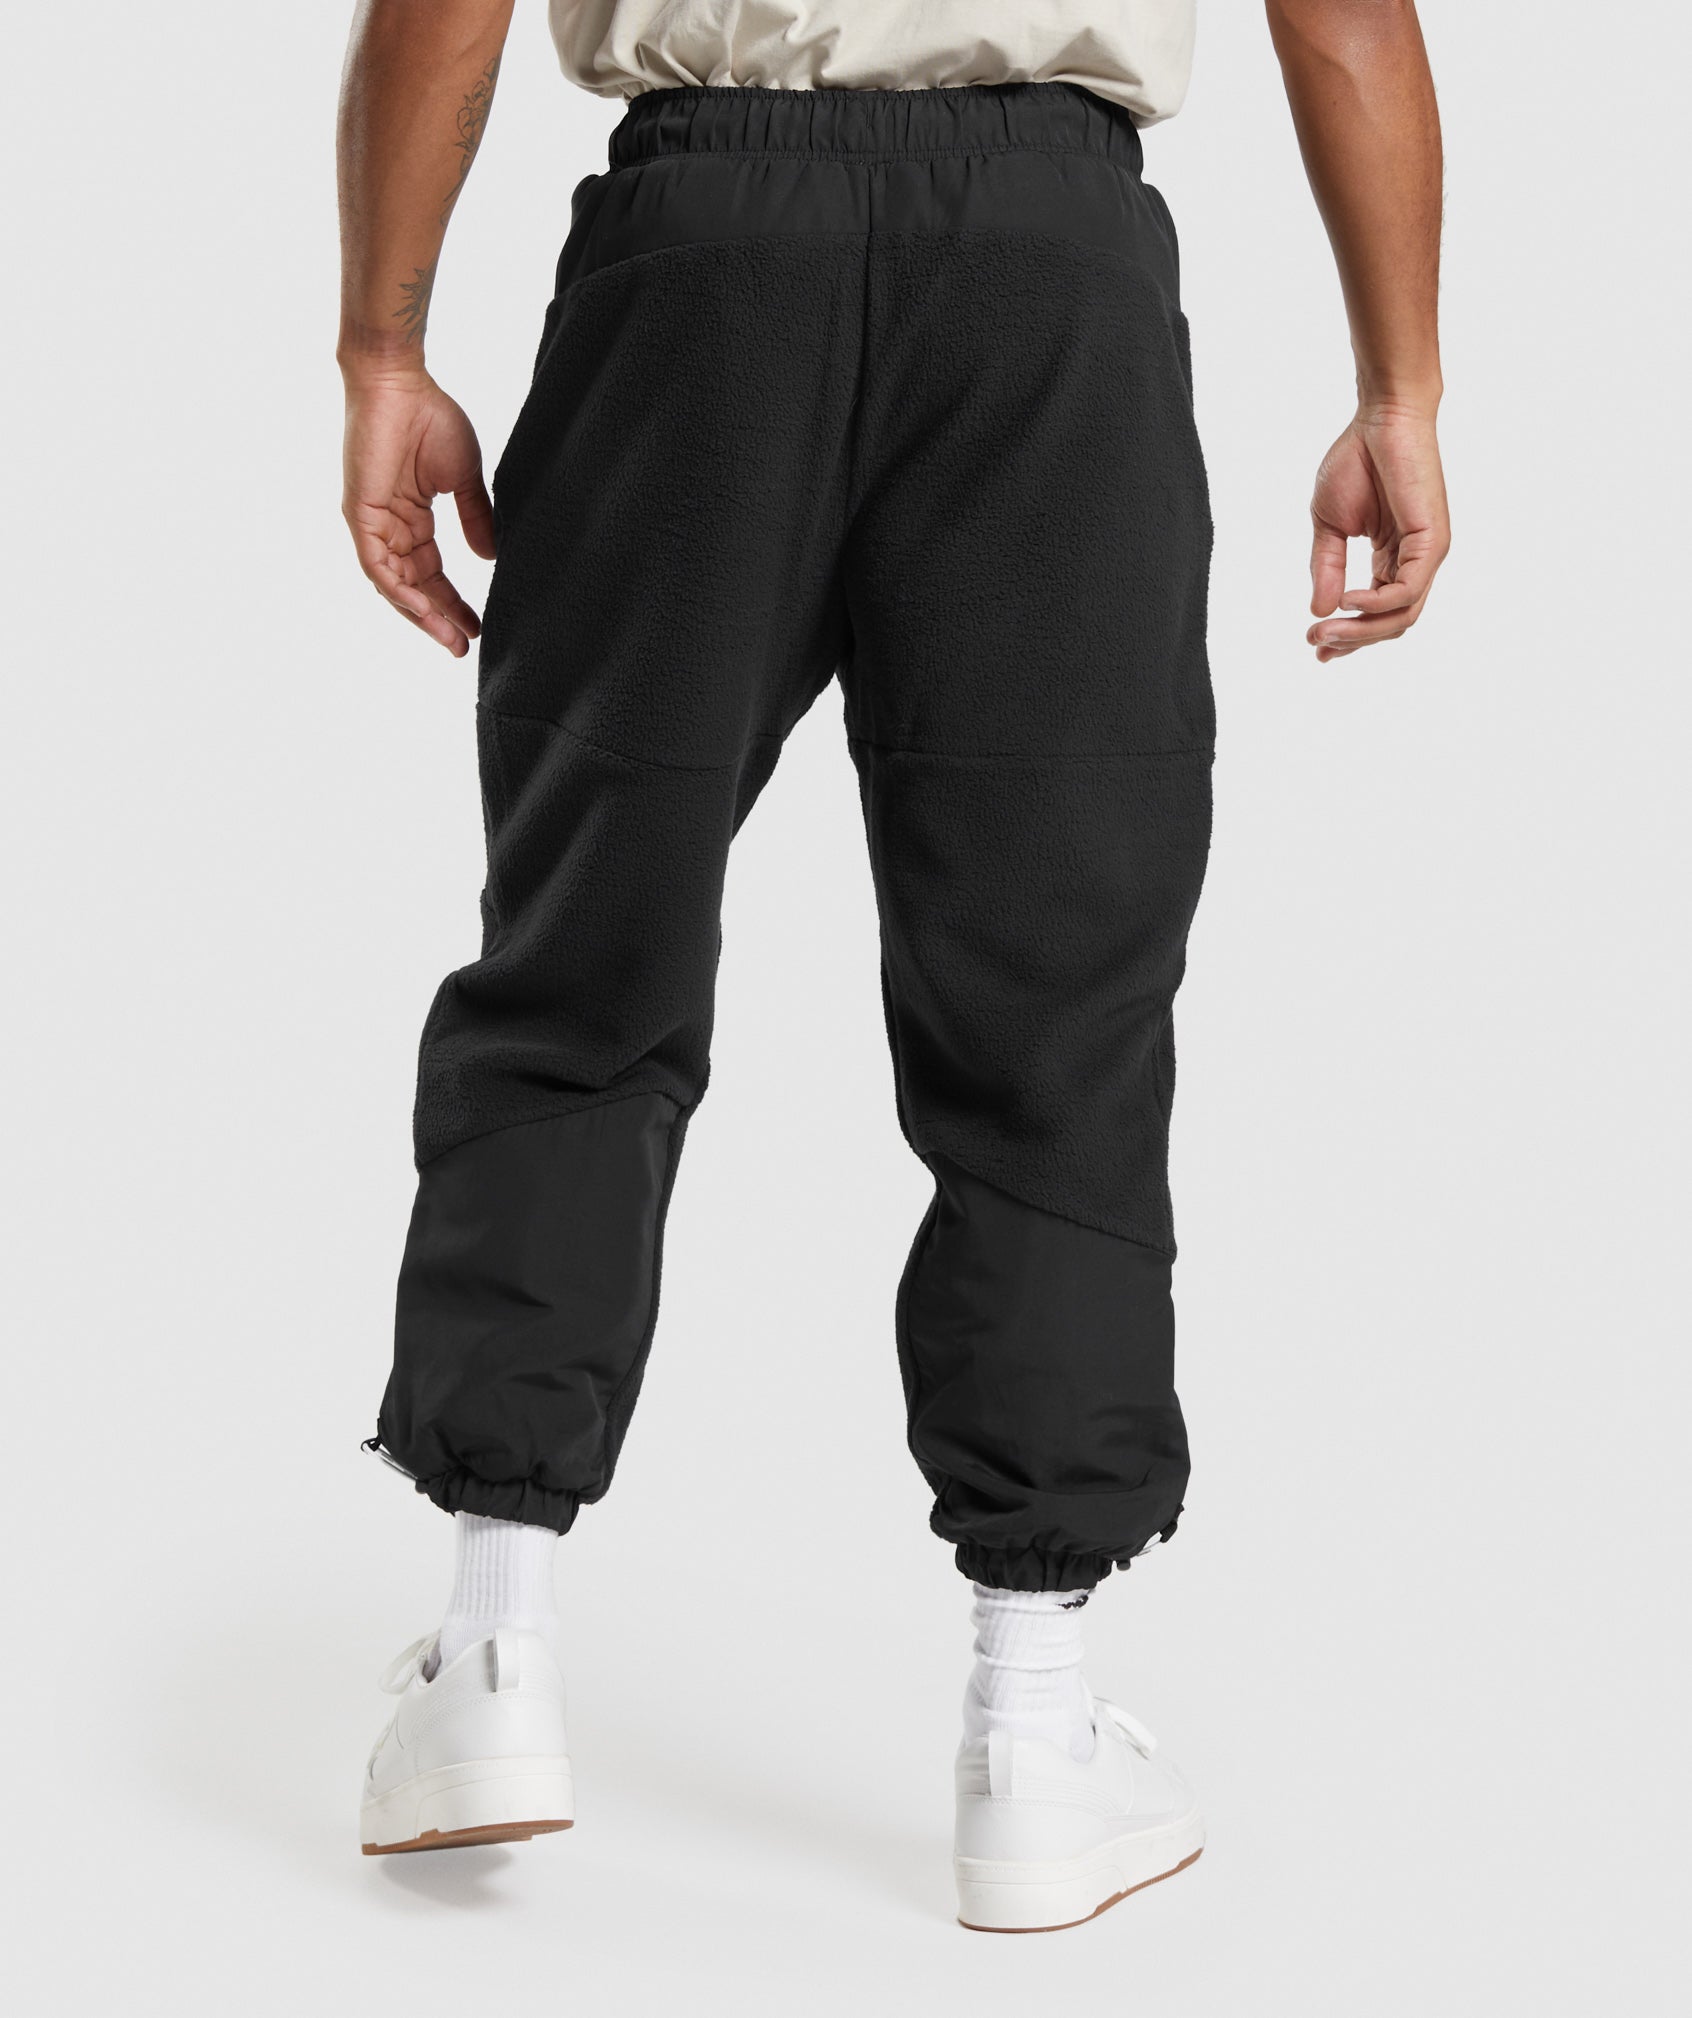 Vibes Joggers in Black - view 2